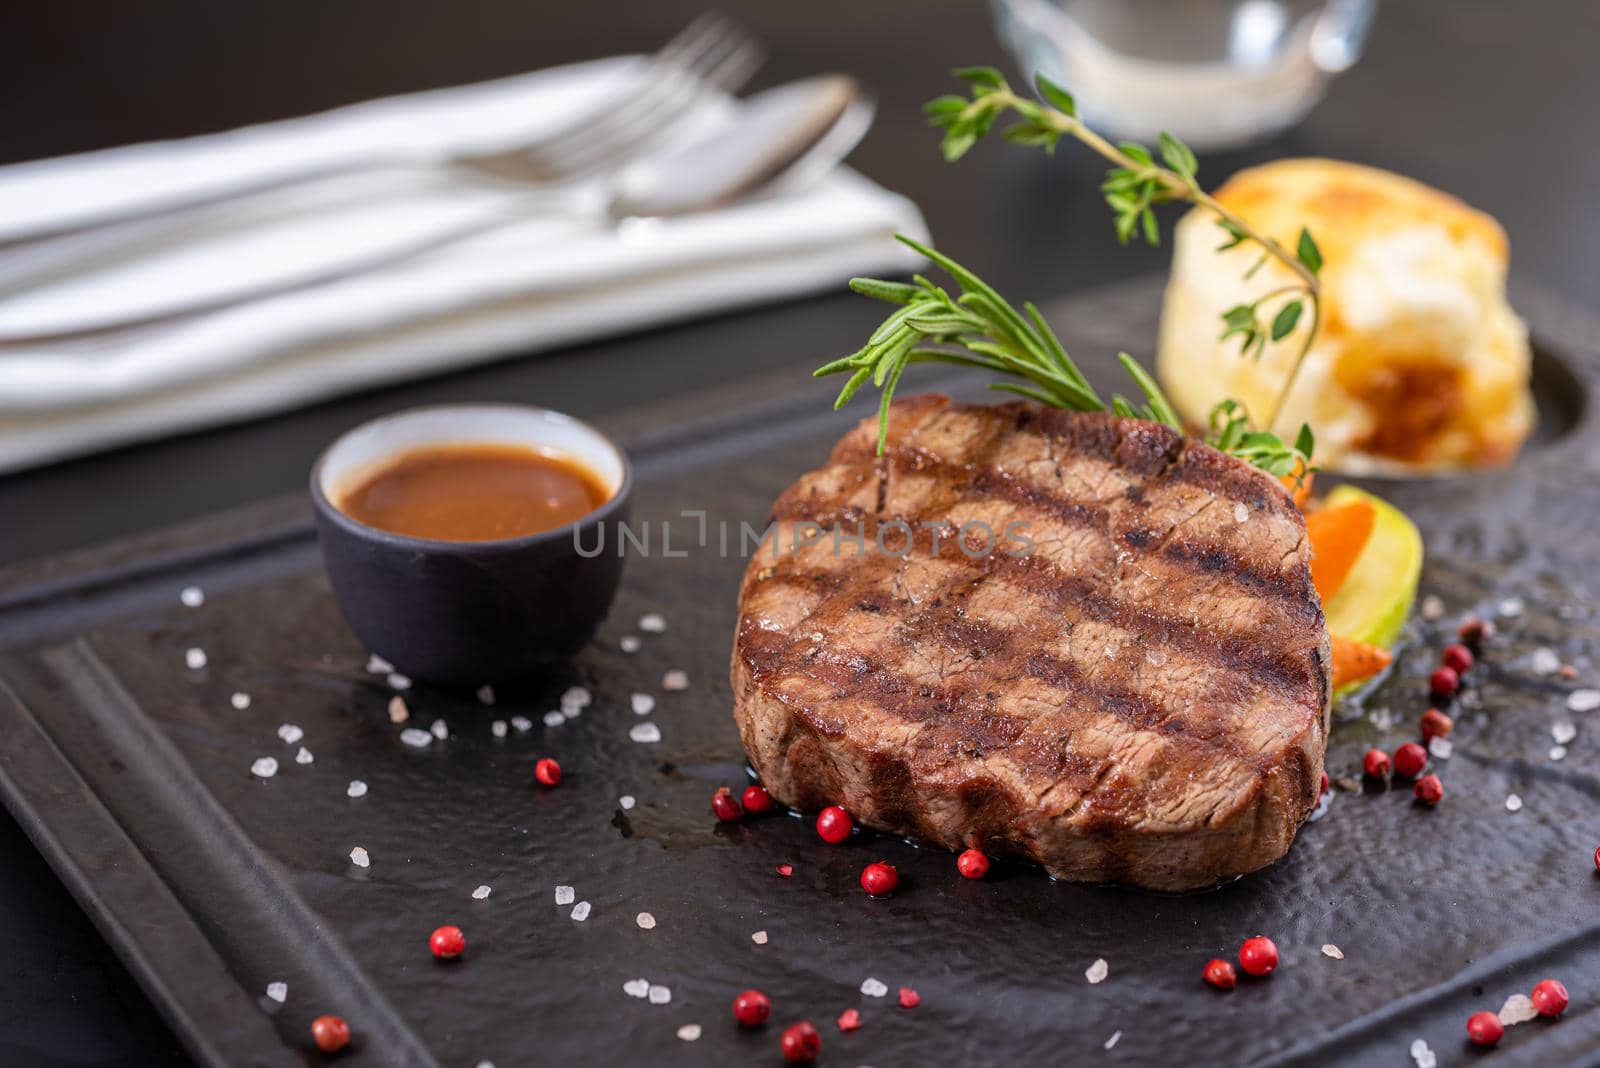 Grilled beef. Tenderloin steak on stone plate with grilled vegetables. Filet Mignon concept. by Sonat